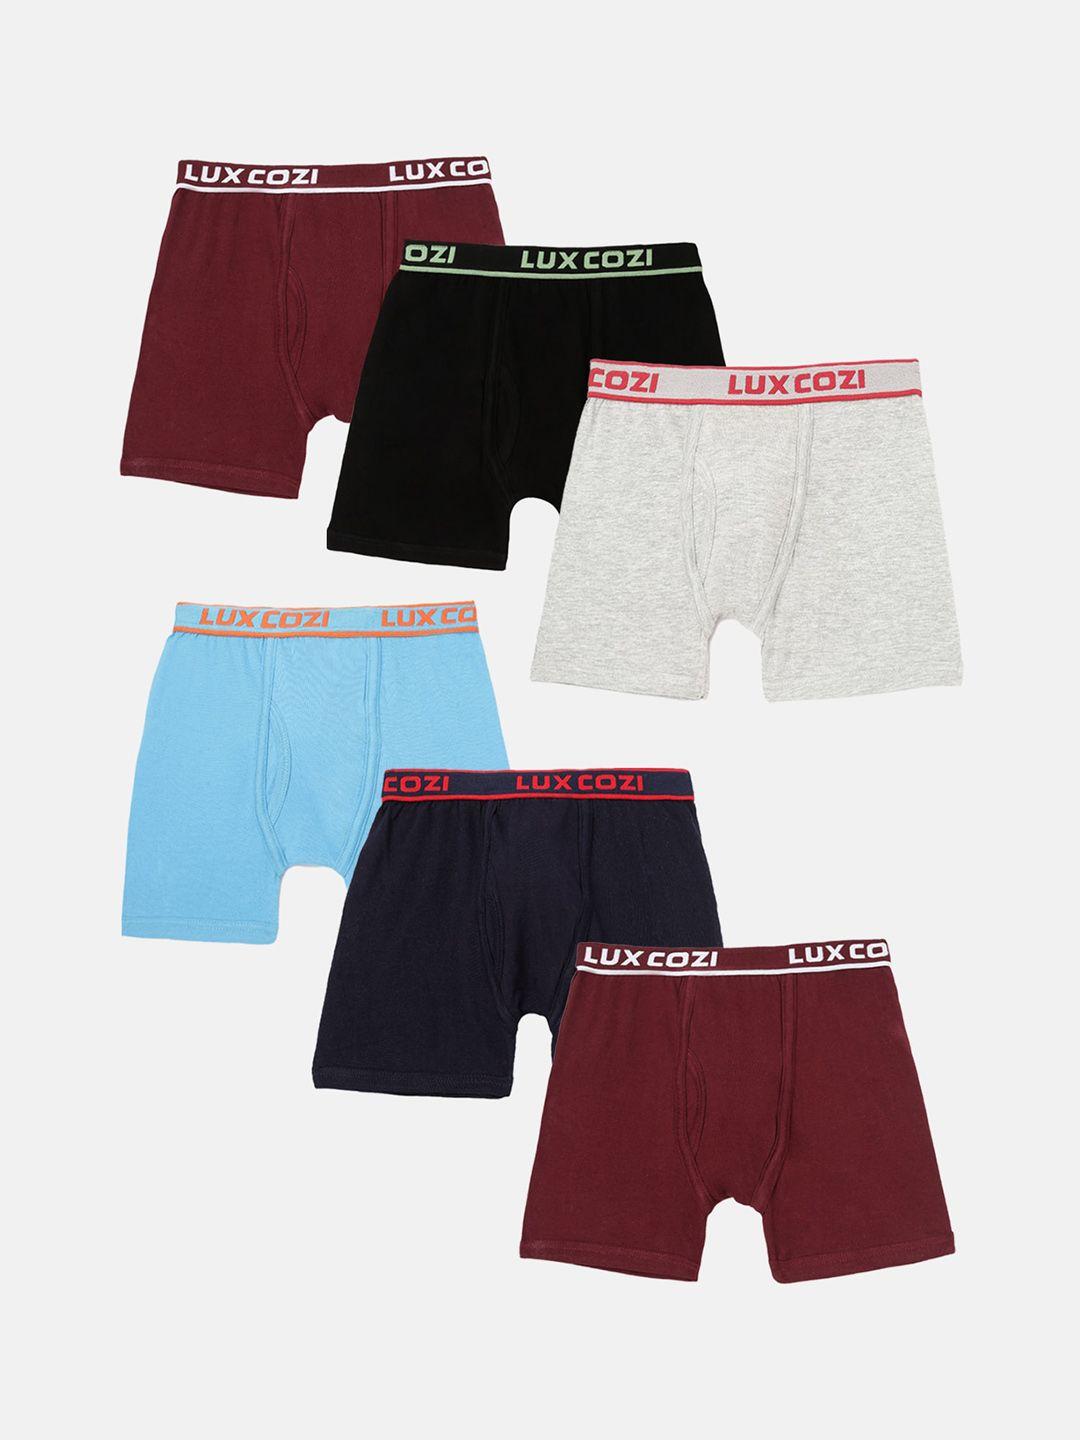 lux cozi boys pack of 6 assorted moisture-wicking trunks